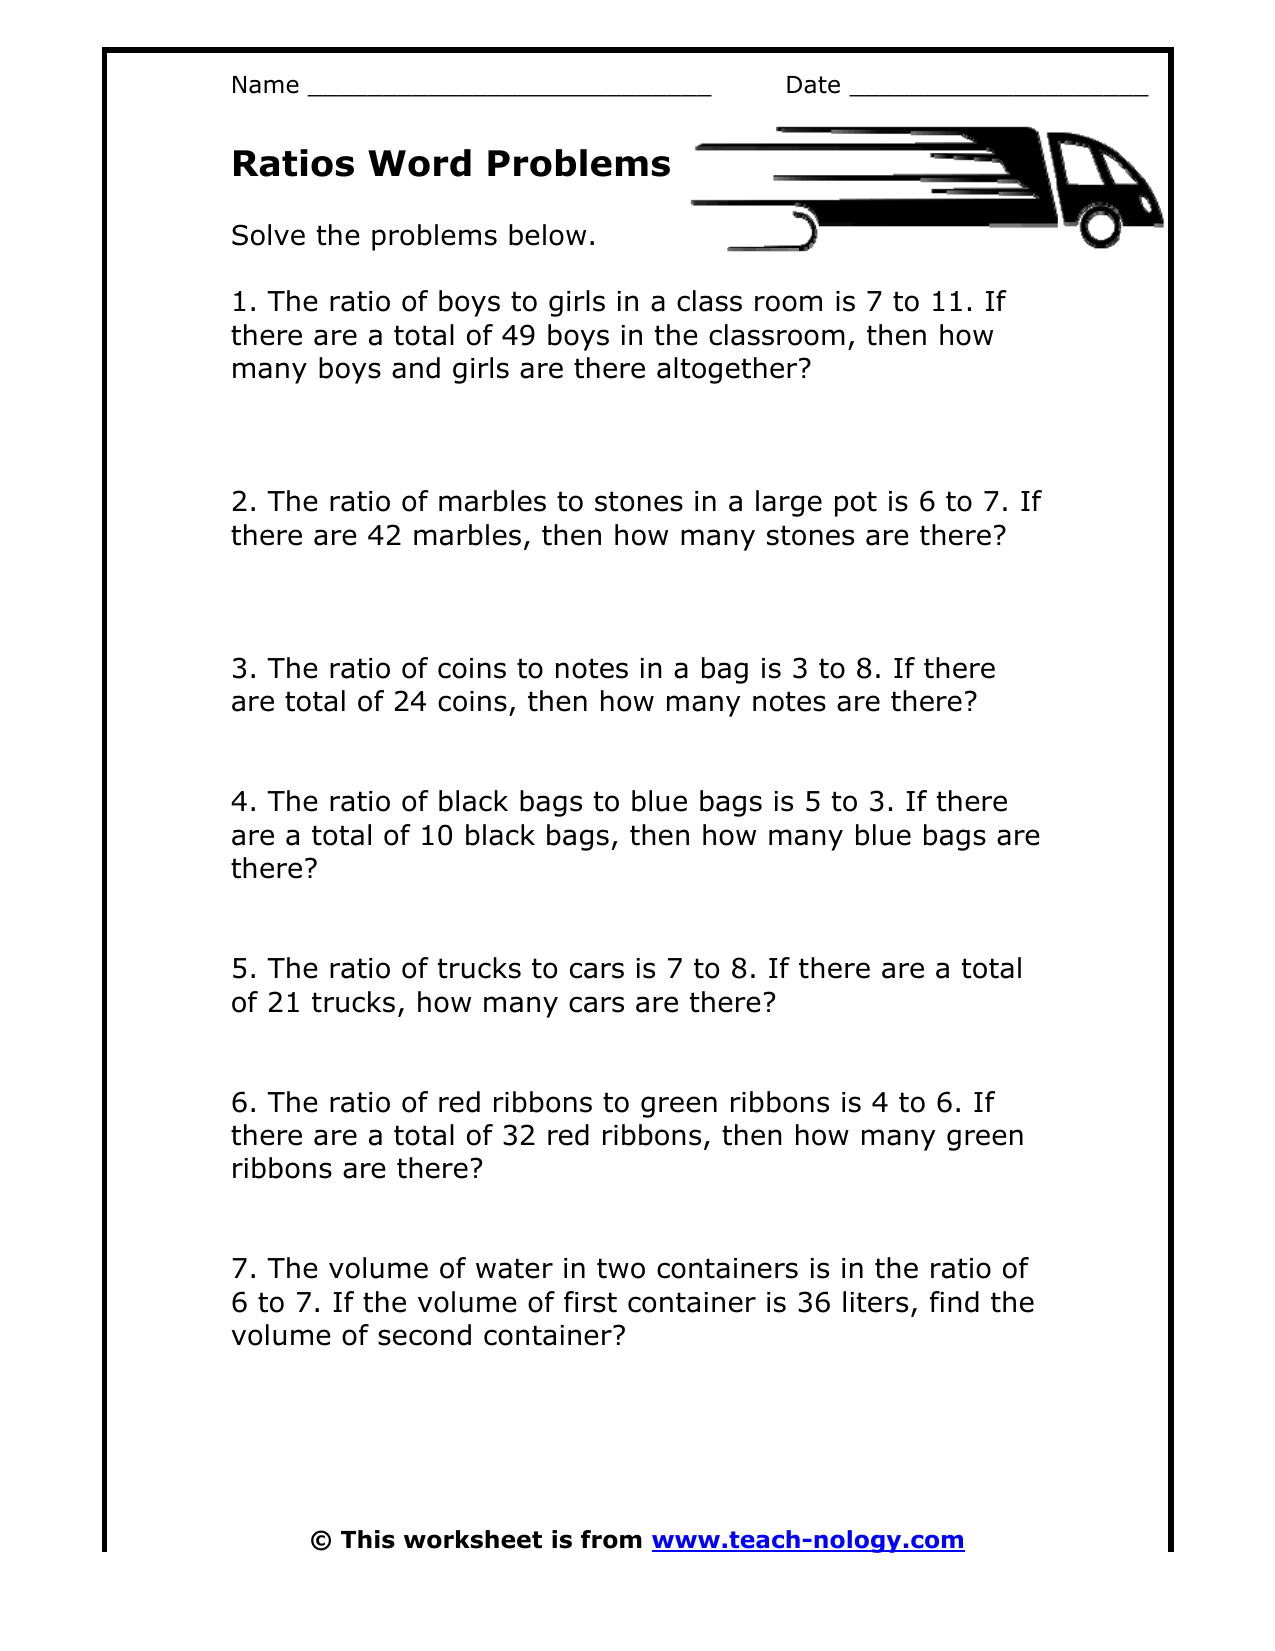 how to solve word problem on ratio